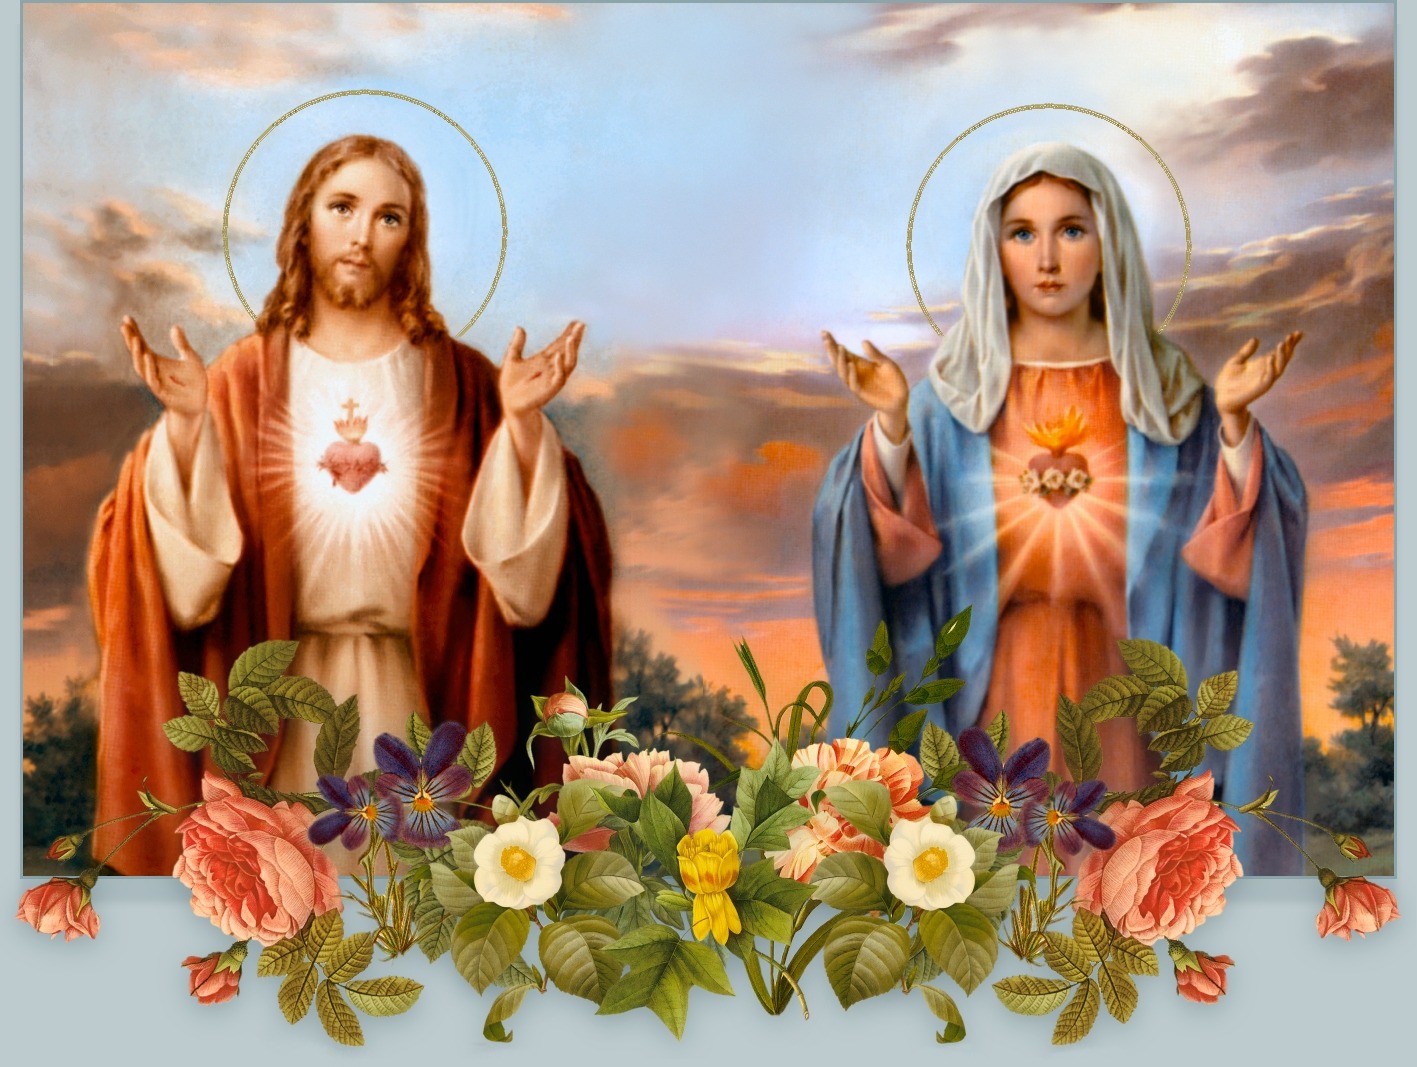 Ask and You Shall Receive Instant Help from Mother Mary and Jesus with this Powerful Prayer – It Works!!